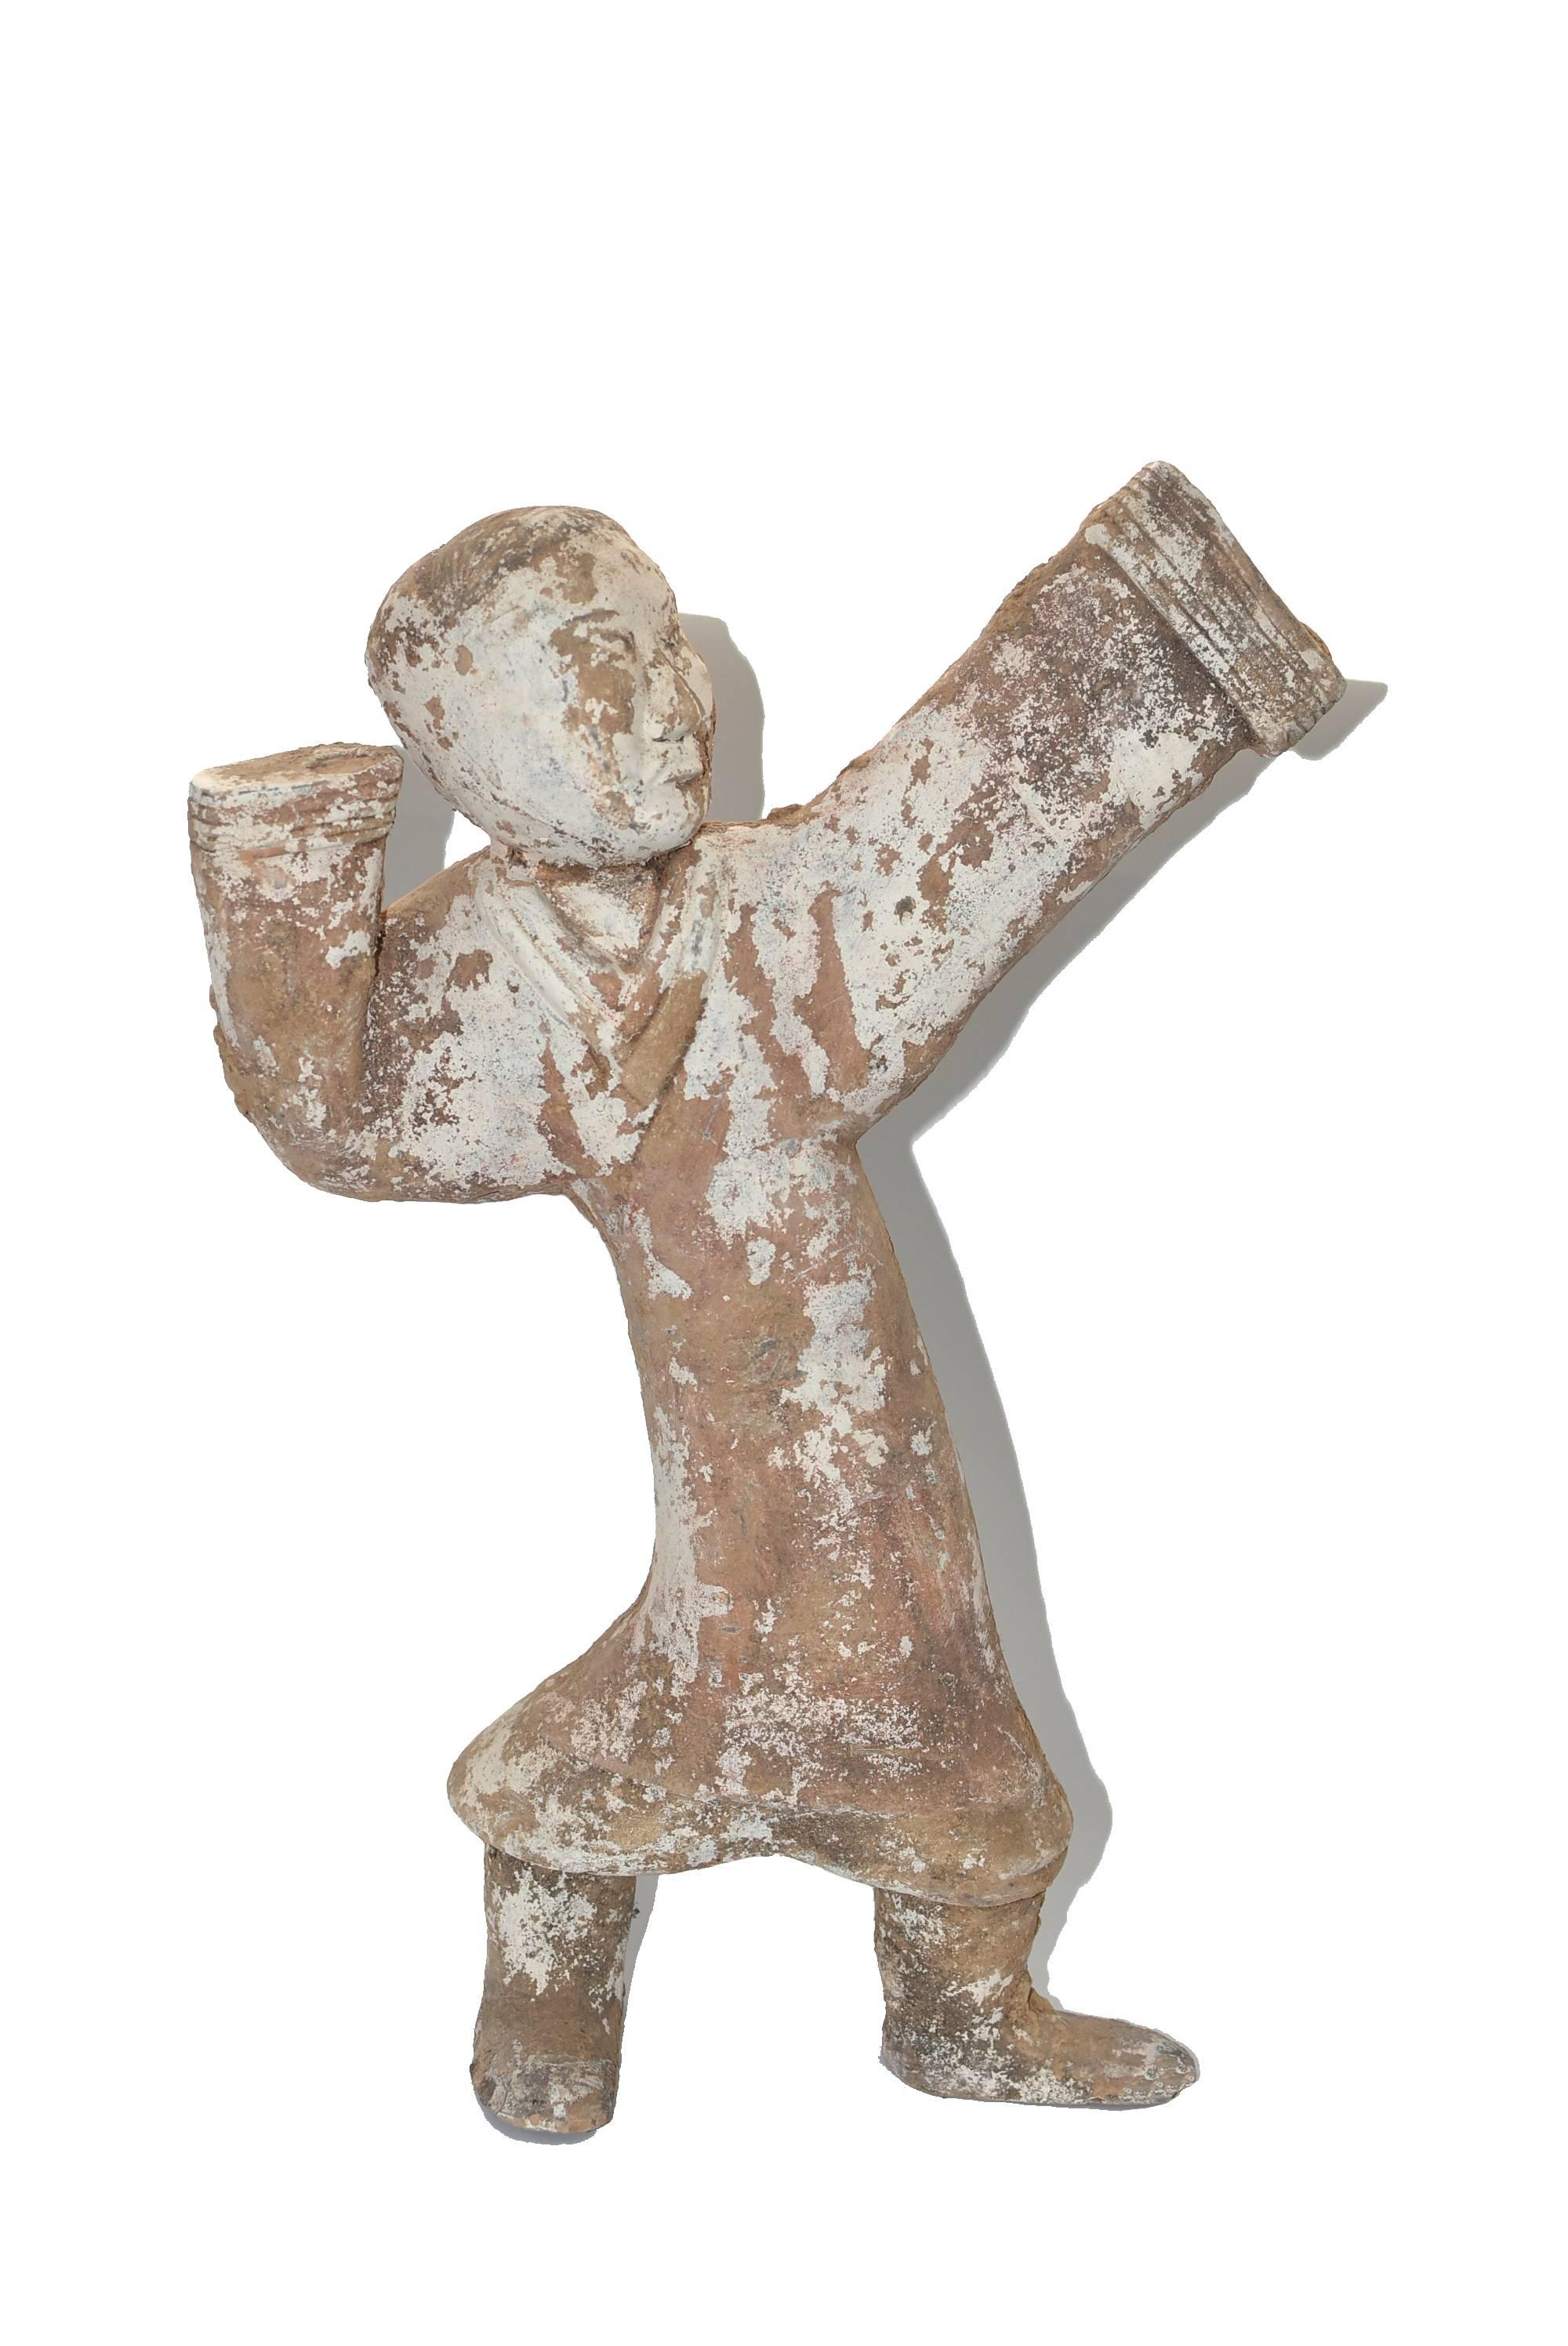 A fantastic, extra large, Han style terracotta figure. Such a figure is seen in the Han dynasty dating 206 BC-220 AD. The figure is in the motion of a ceremonial dance. Either a servant or a dancer, such a statue was regarded as a status symbol and